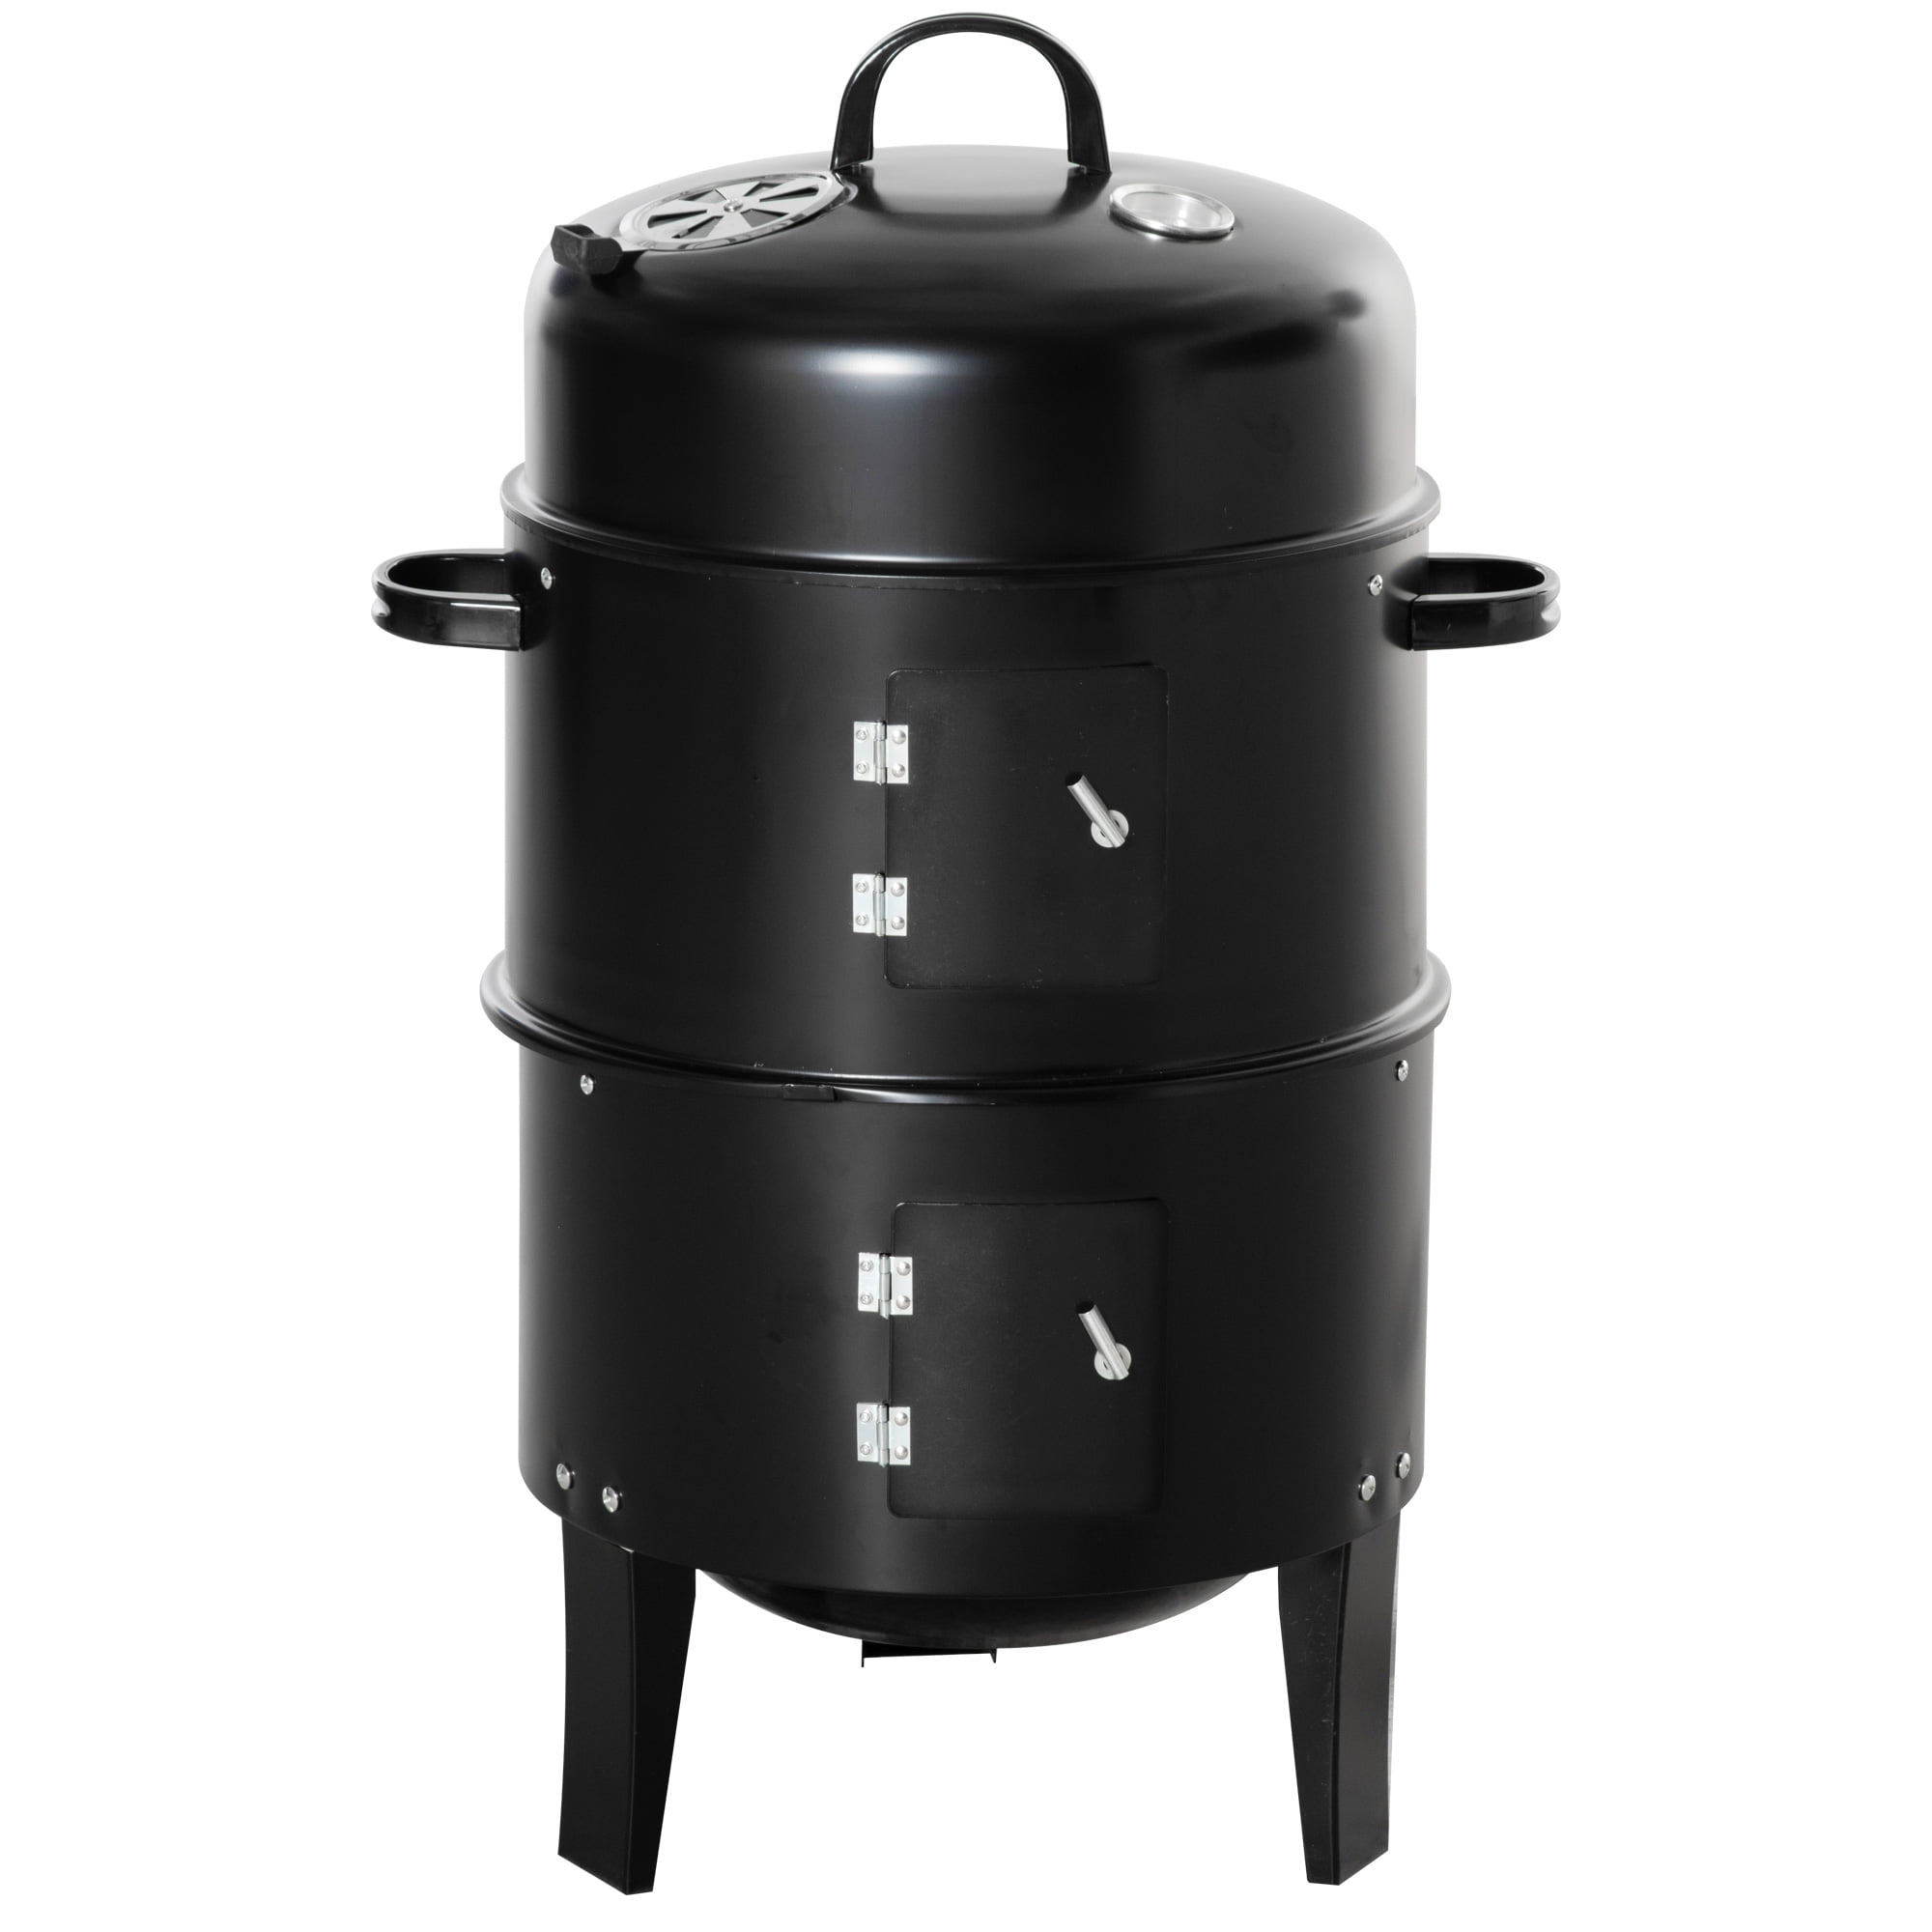 MFSTUDIO Heavy Duty Outdoor Smoker, Portable BBQ Charcoal Grill with Offset  Smoker, 512 Sq.In. Cooking Area for Camping and Picnic, Black